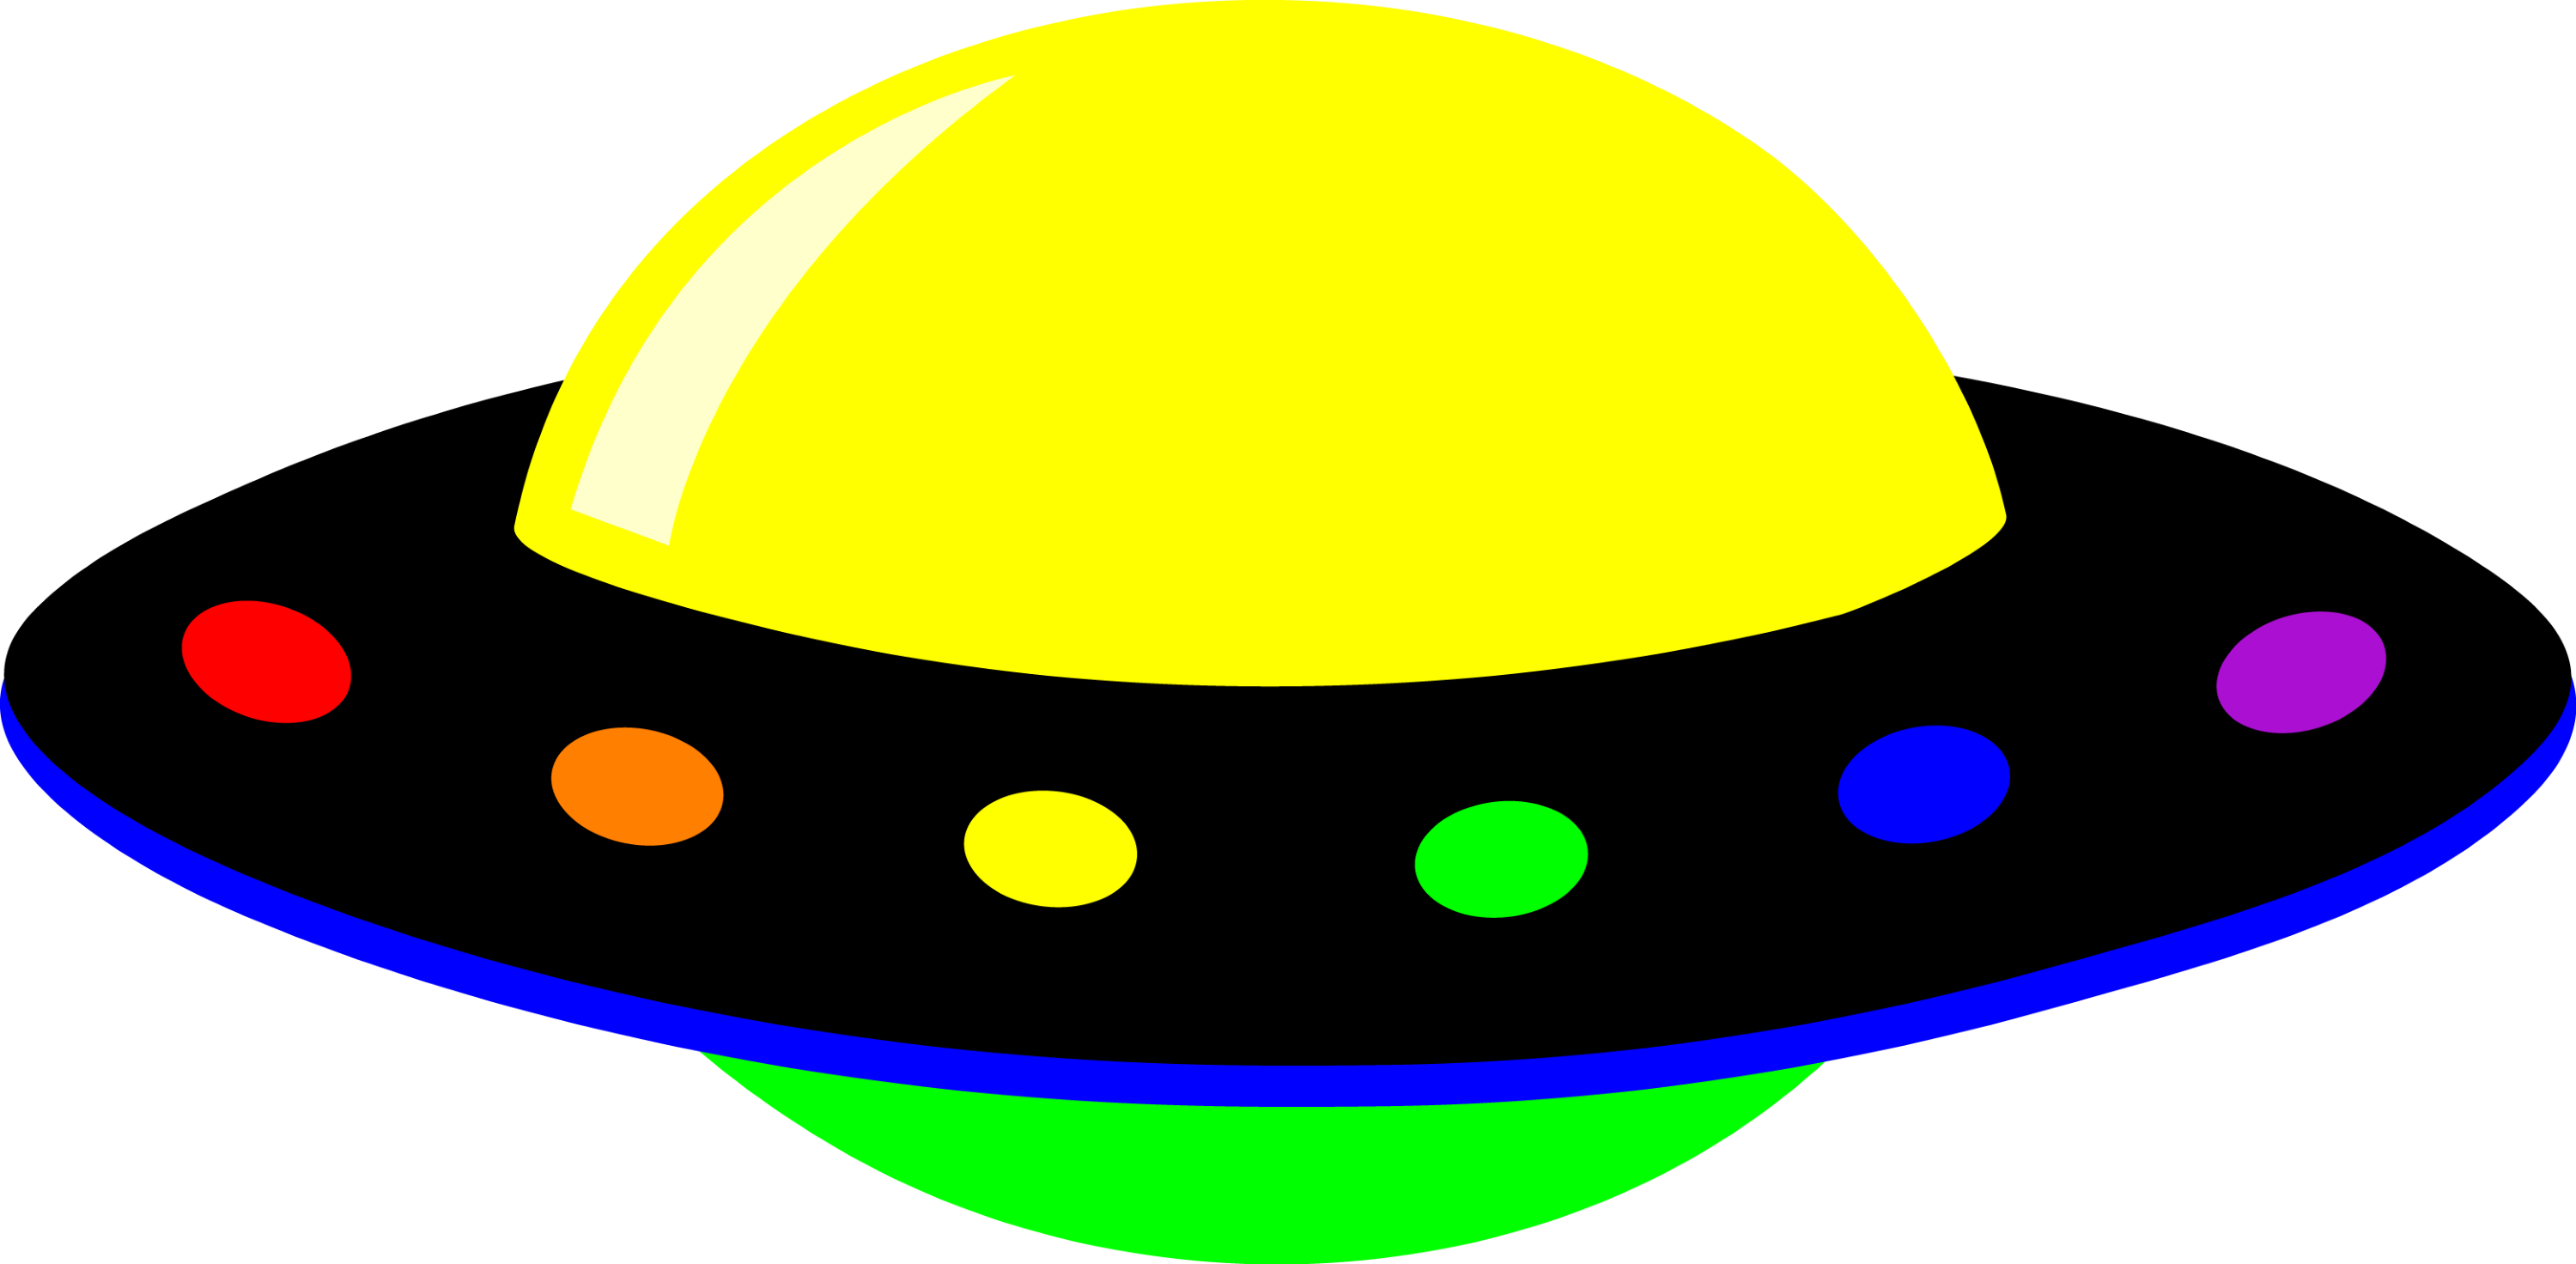 clipart of ufo - photo #23